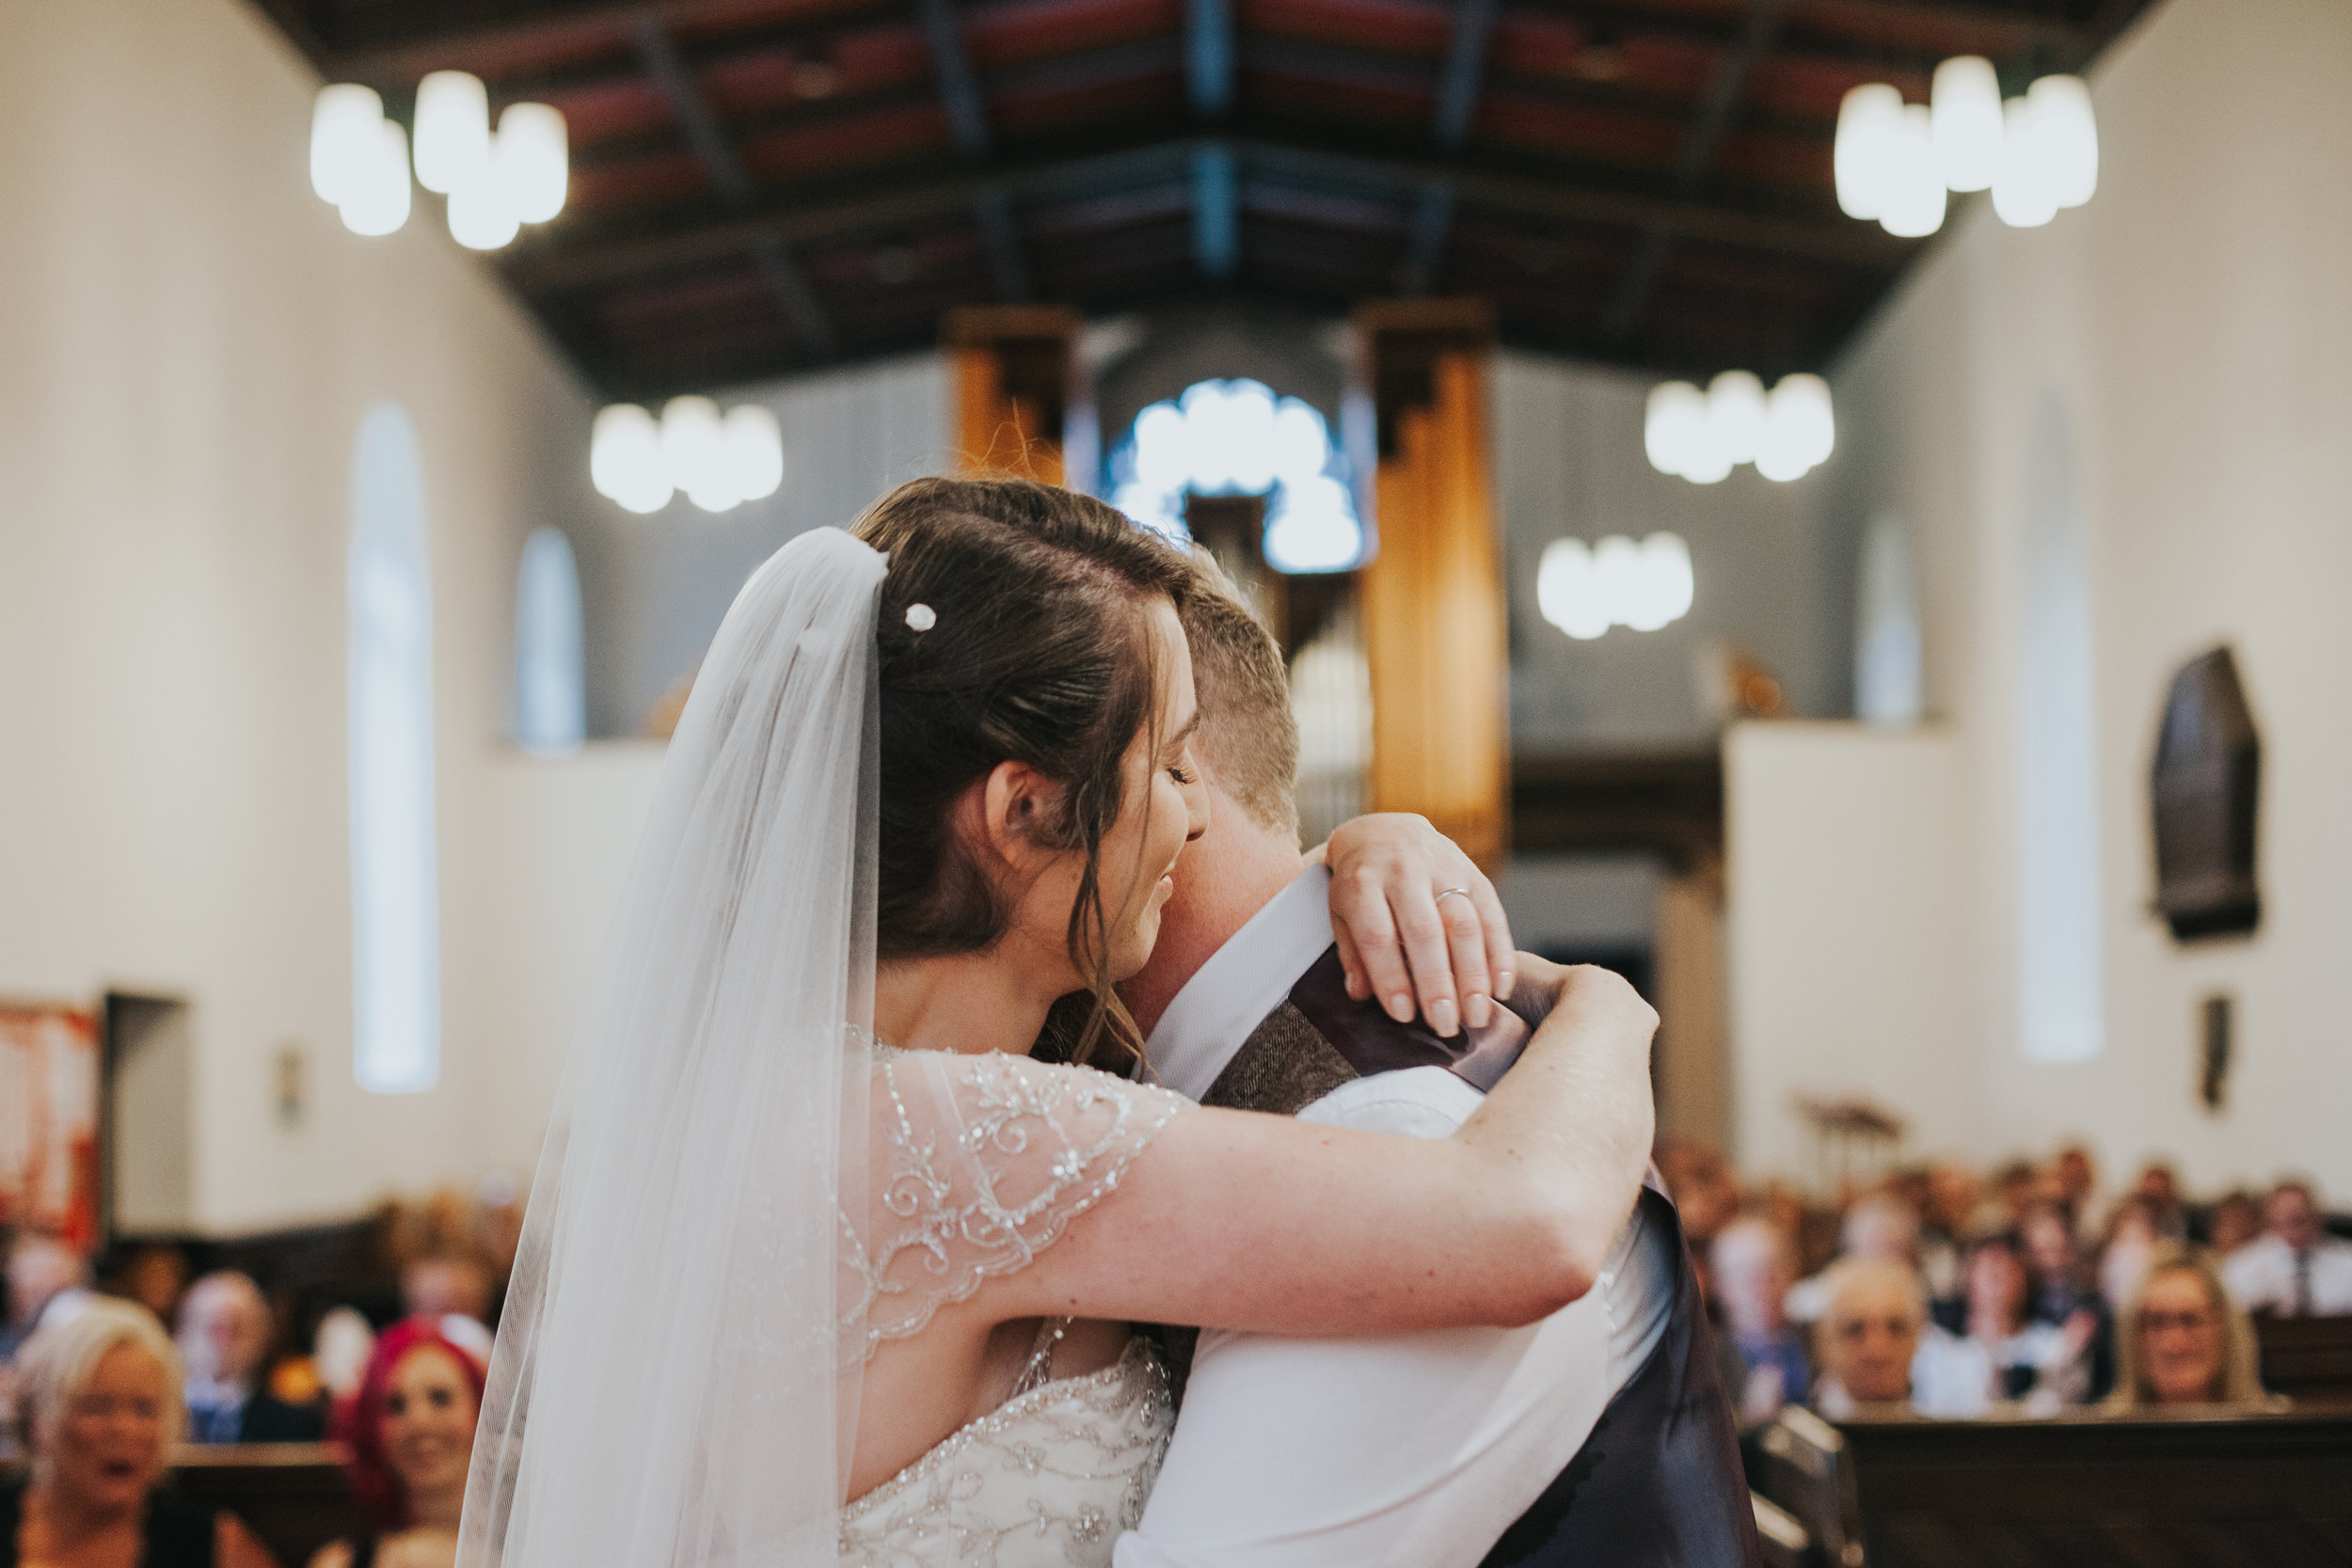  Husband and Wife embrace in church (beautifully captured in a more or less symmetrical shot by photographer) 